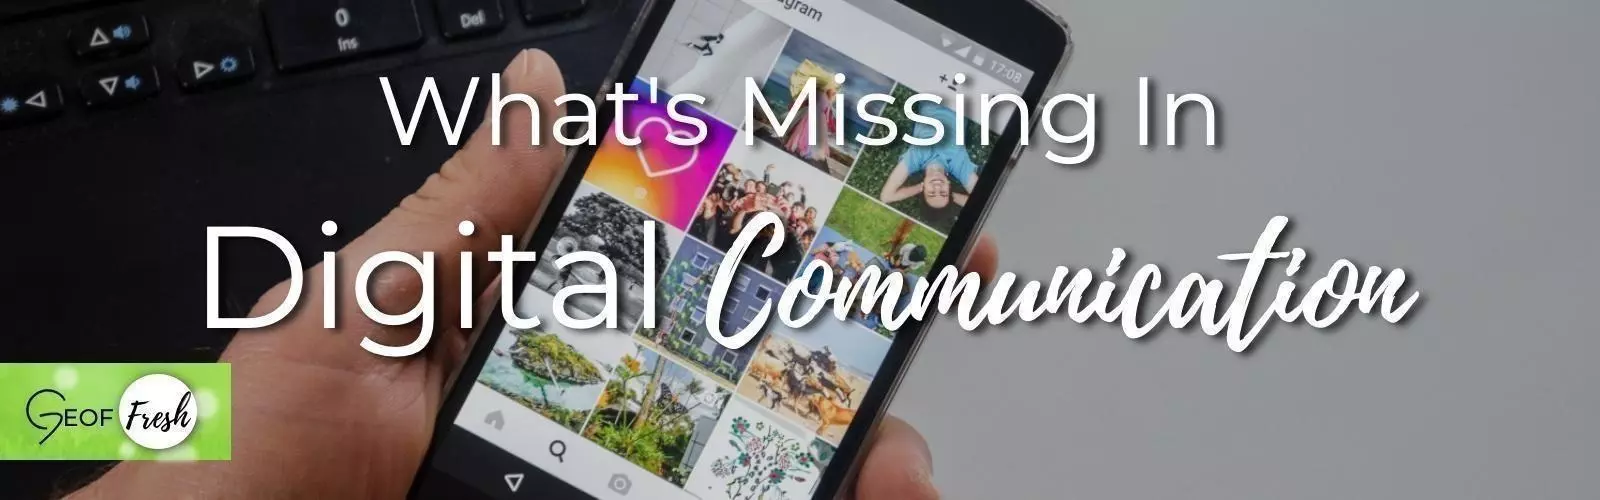 what's missing in digital communications